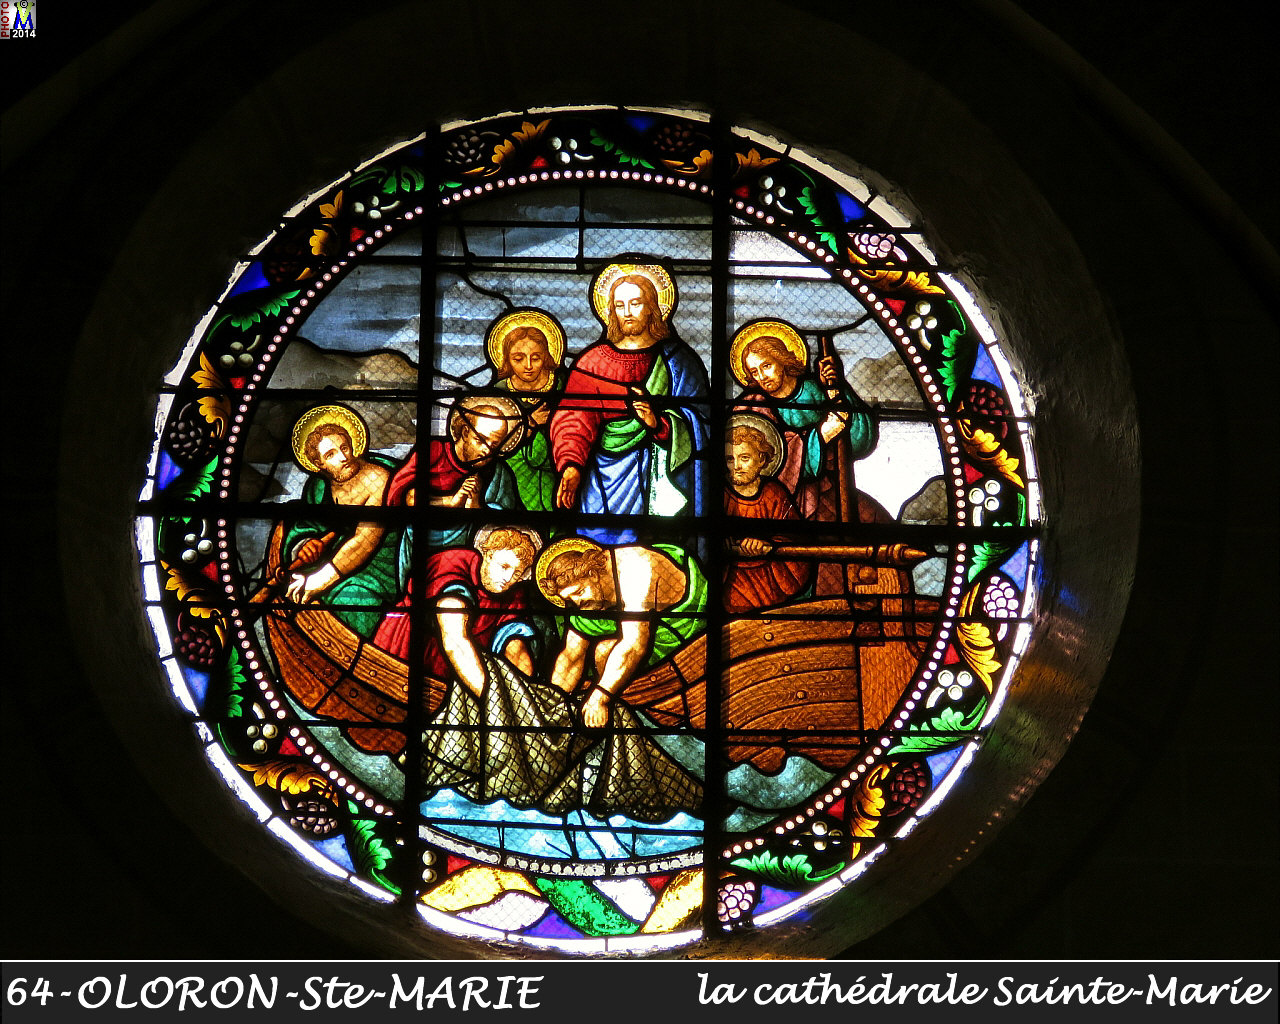 64OLORON-STE-MARIE_cathedrale_204.jpg